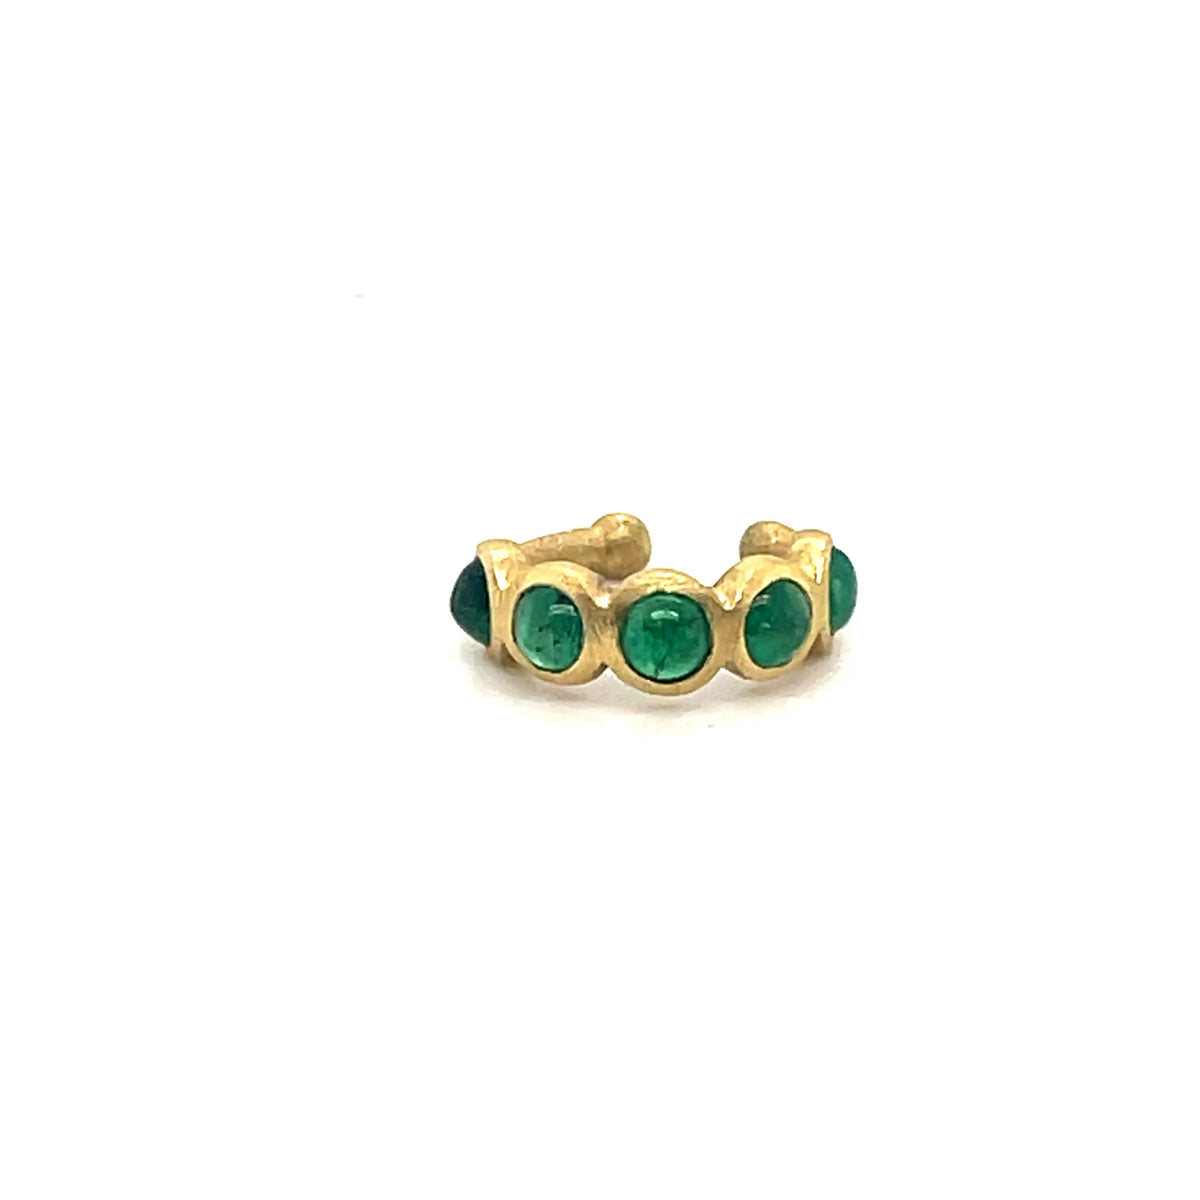 18K yellow gold bezel ear cuff with 5 round emerald cabs with .53ctw.  Designed by Samantha Louise